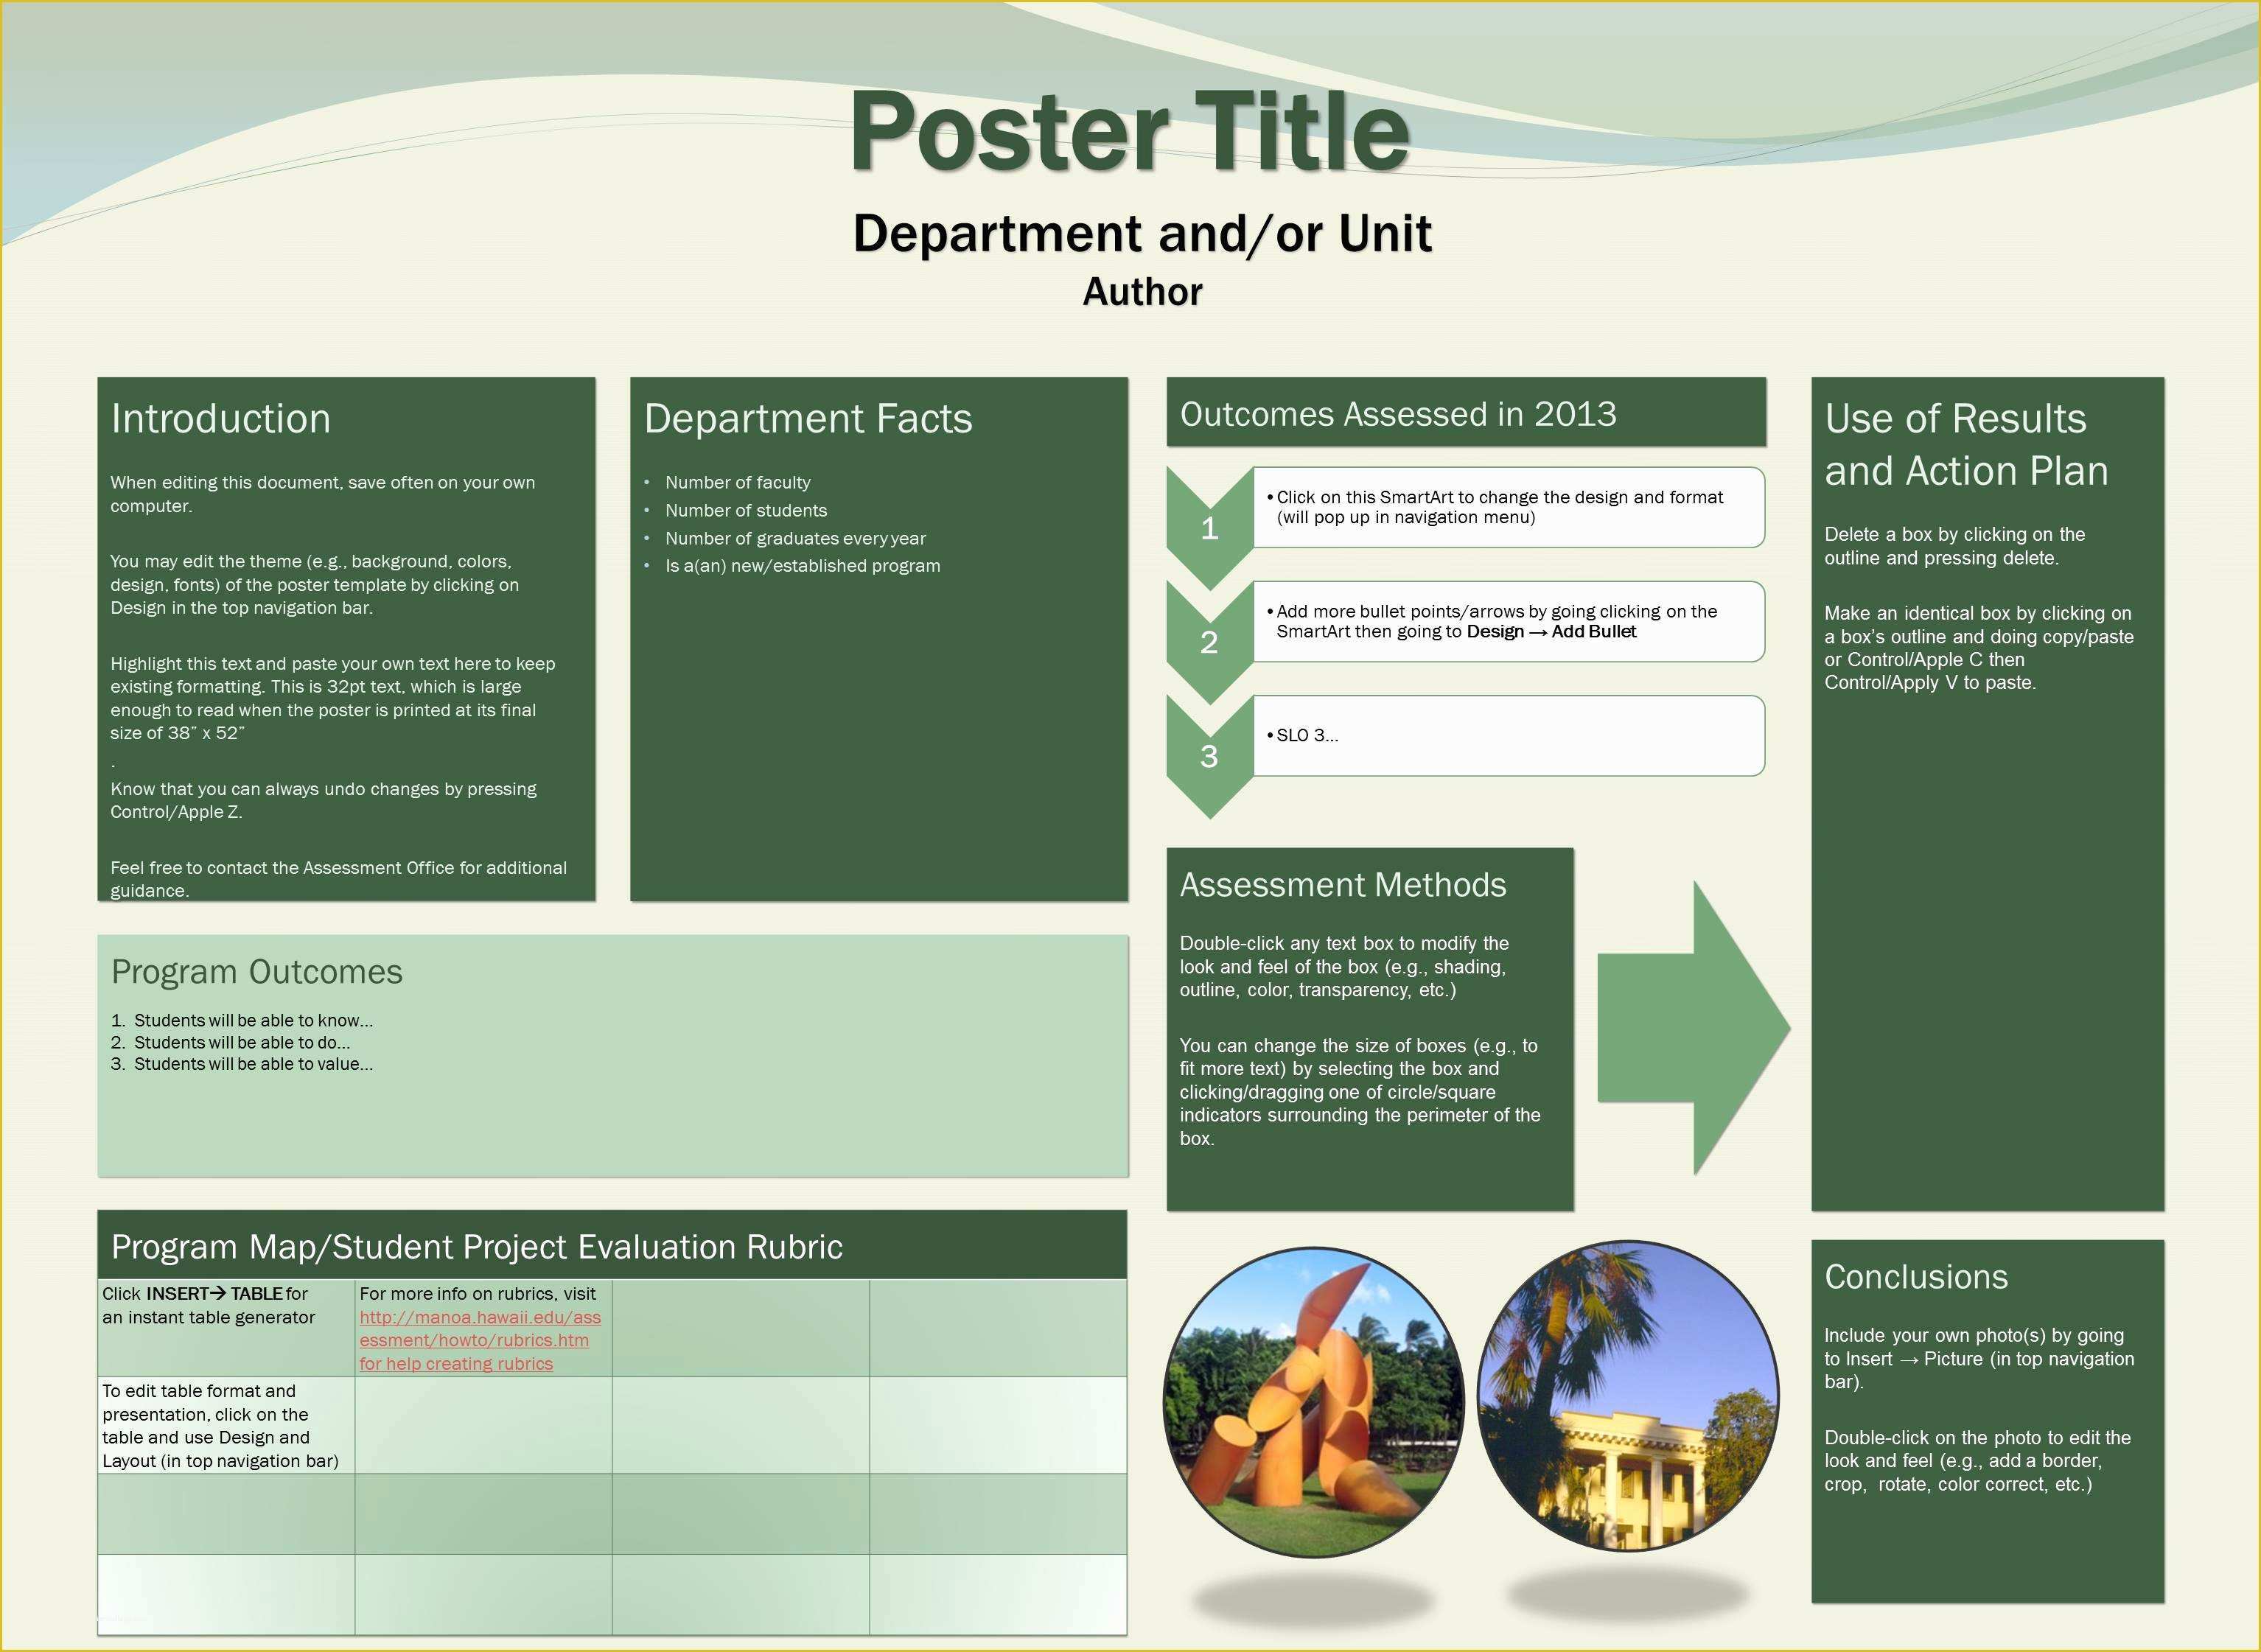 Free Poster Design Templates Of University Of Hawaii at Manoa assessment Fice